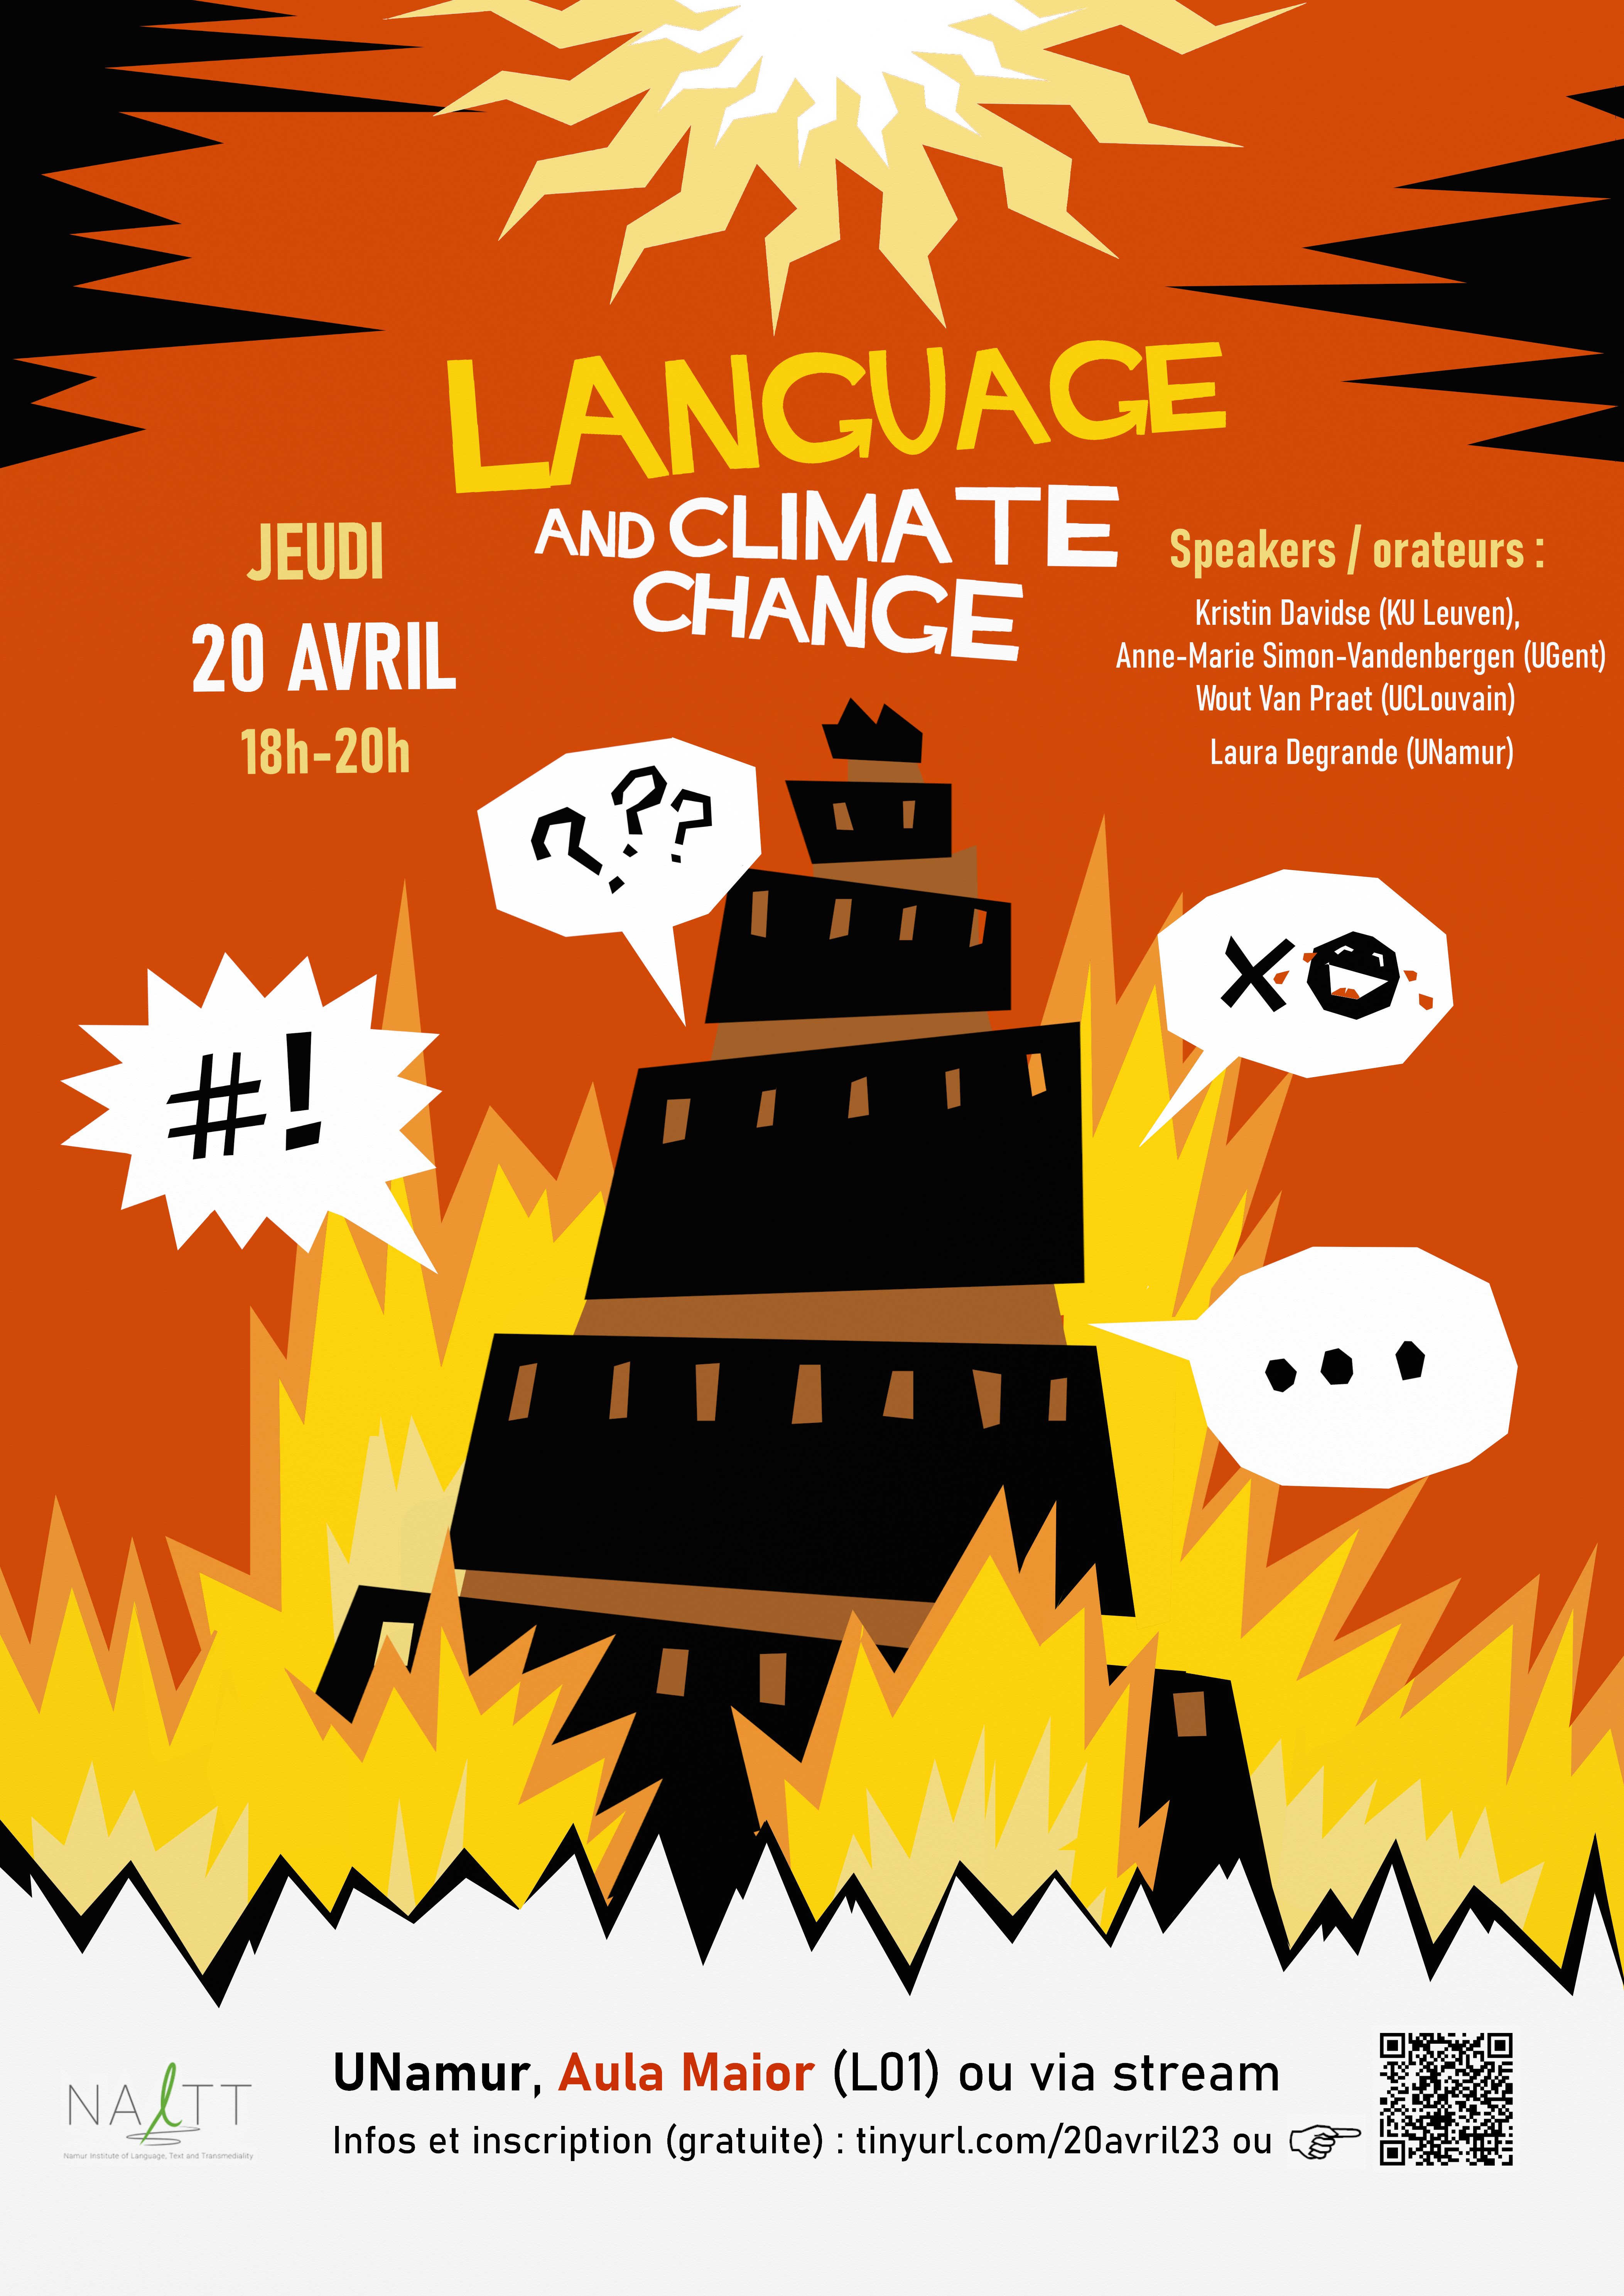 Poster NaLTT 20 April 2023 - Language and climate change